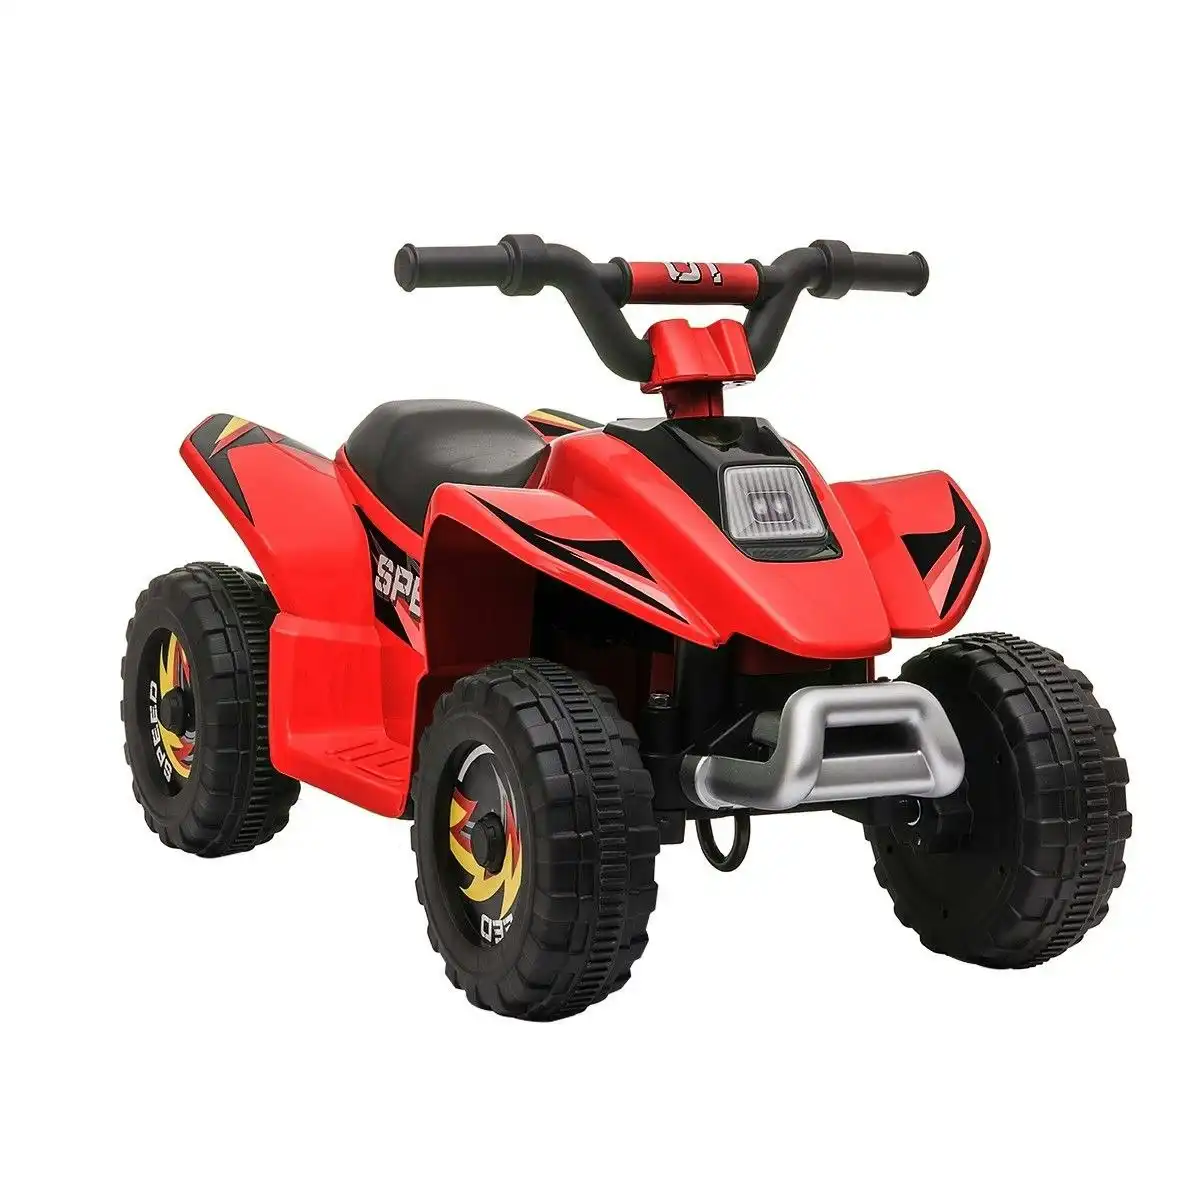 Ausway Kids Ride On Toy 6V Electric ATV Quad Rechargeable Battery Red